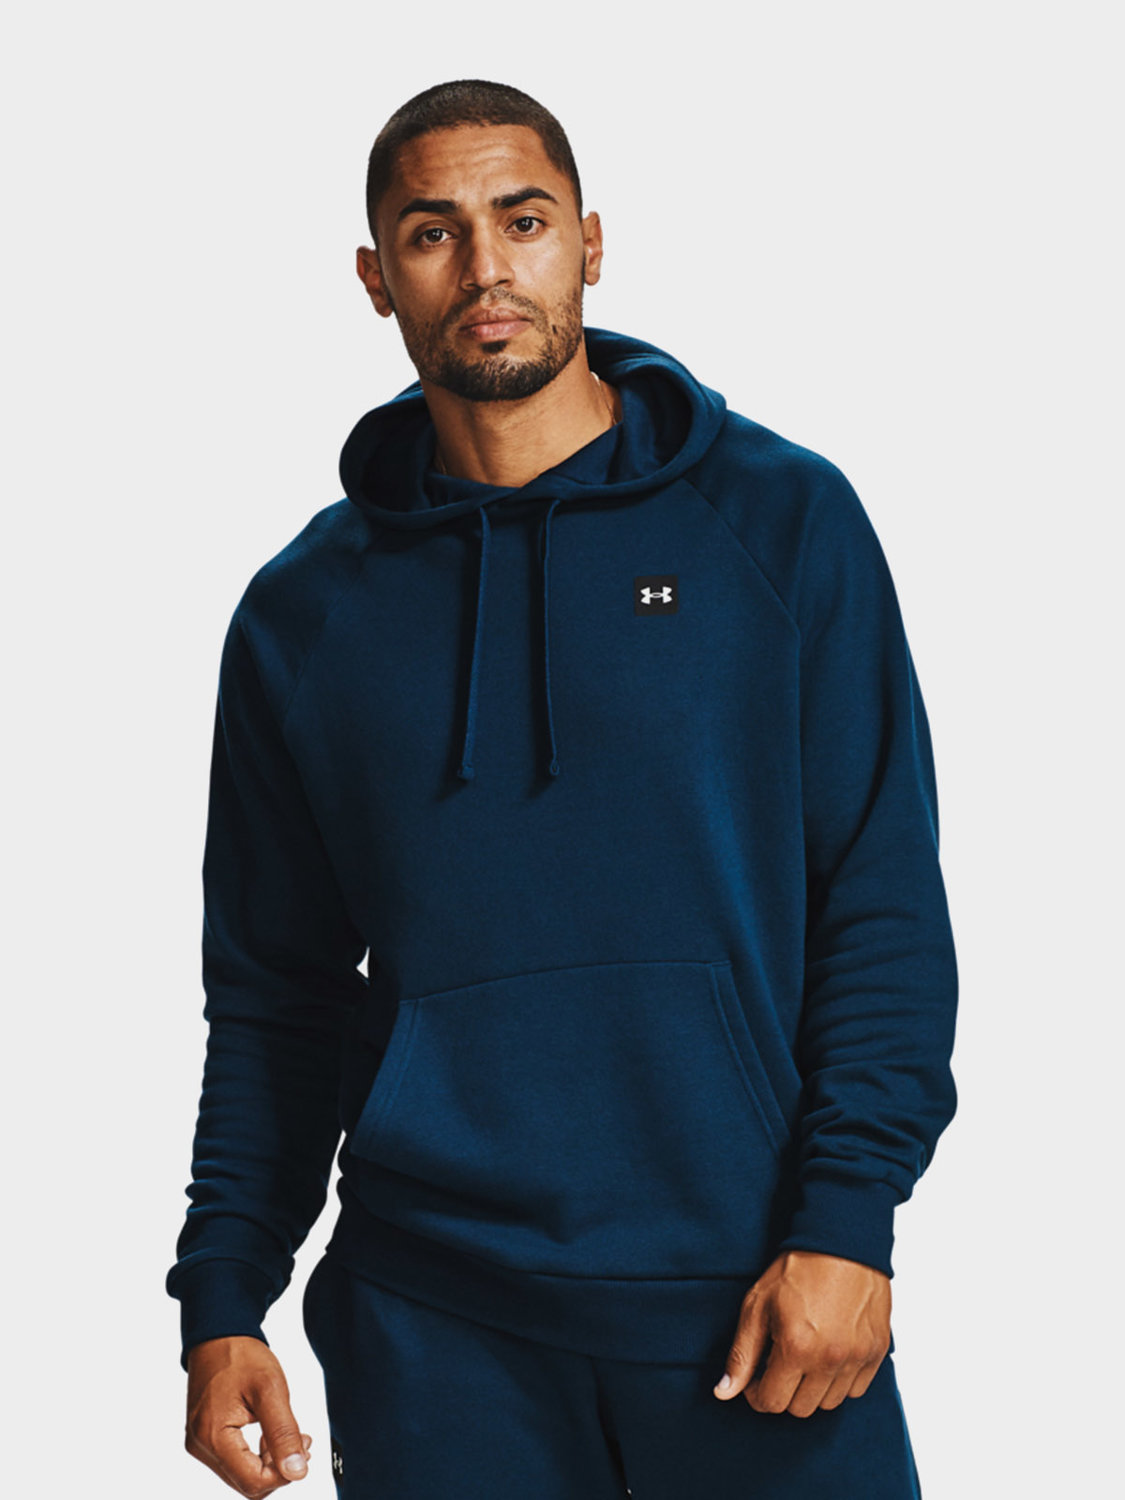 Under Armour 1365685 Men's UA Base 3.0 Hoodie Long Sleeve Pullover